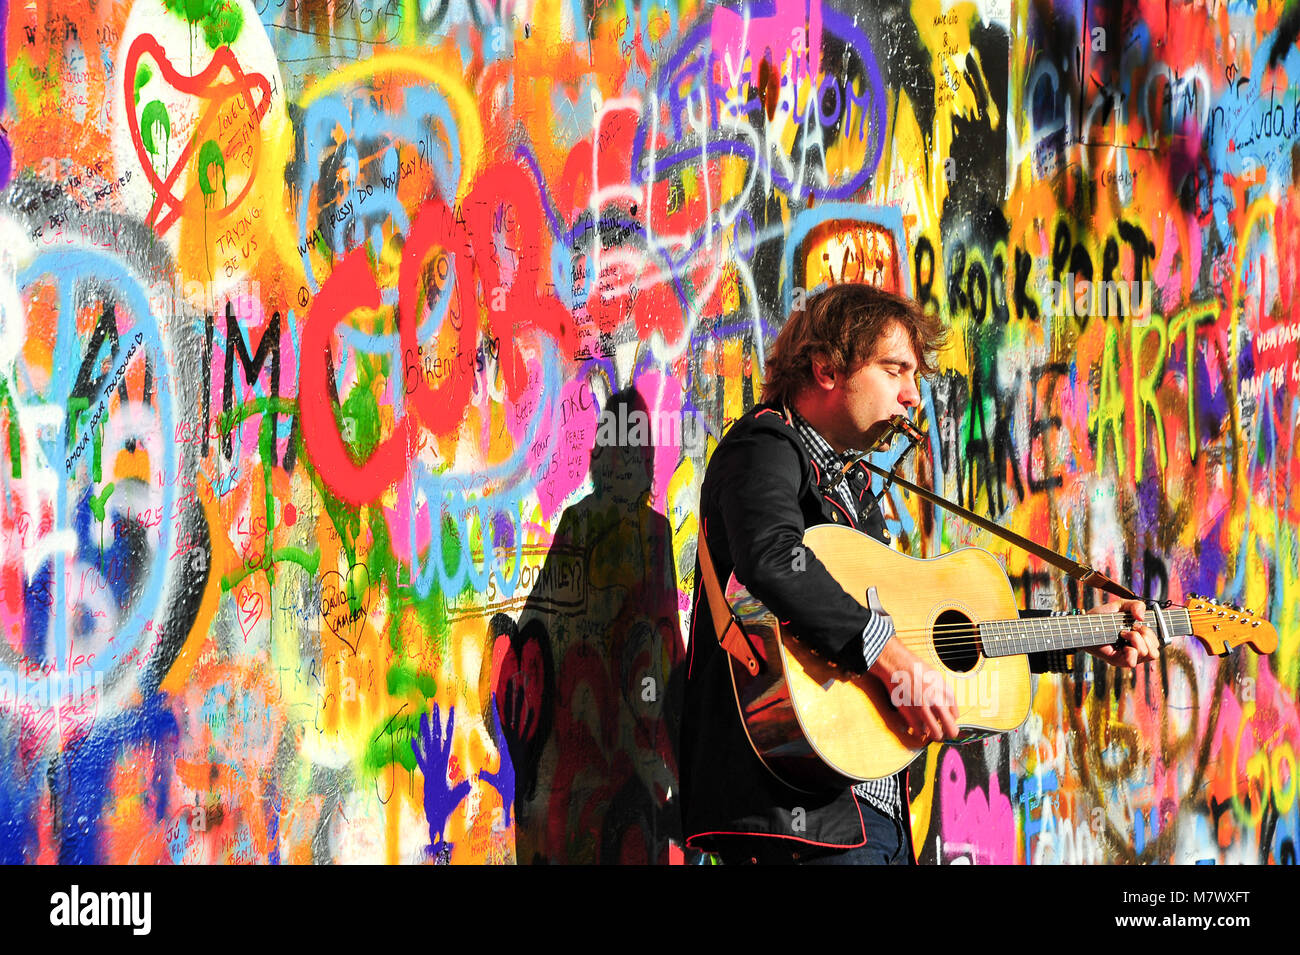 Street busker performs Beatles music at the John Lennon Wall on Kampa Island. in Prague. Musician with guitar in front of colourful graffiti wall Stock Photo